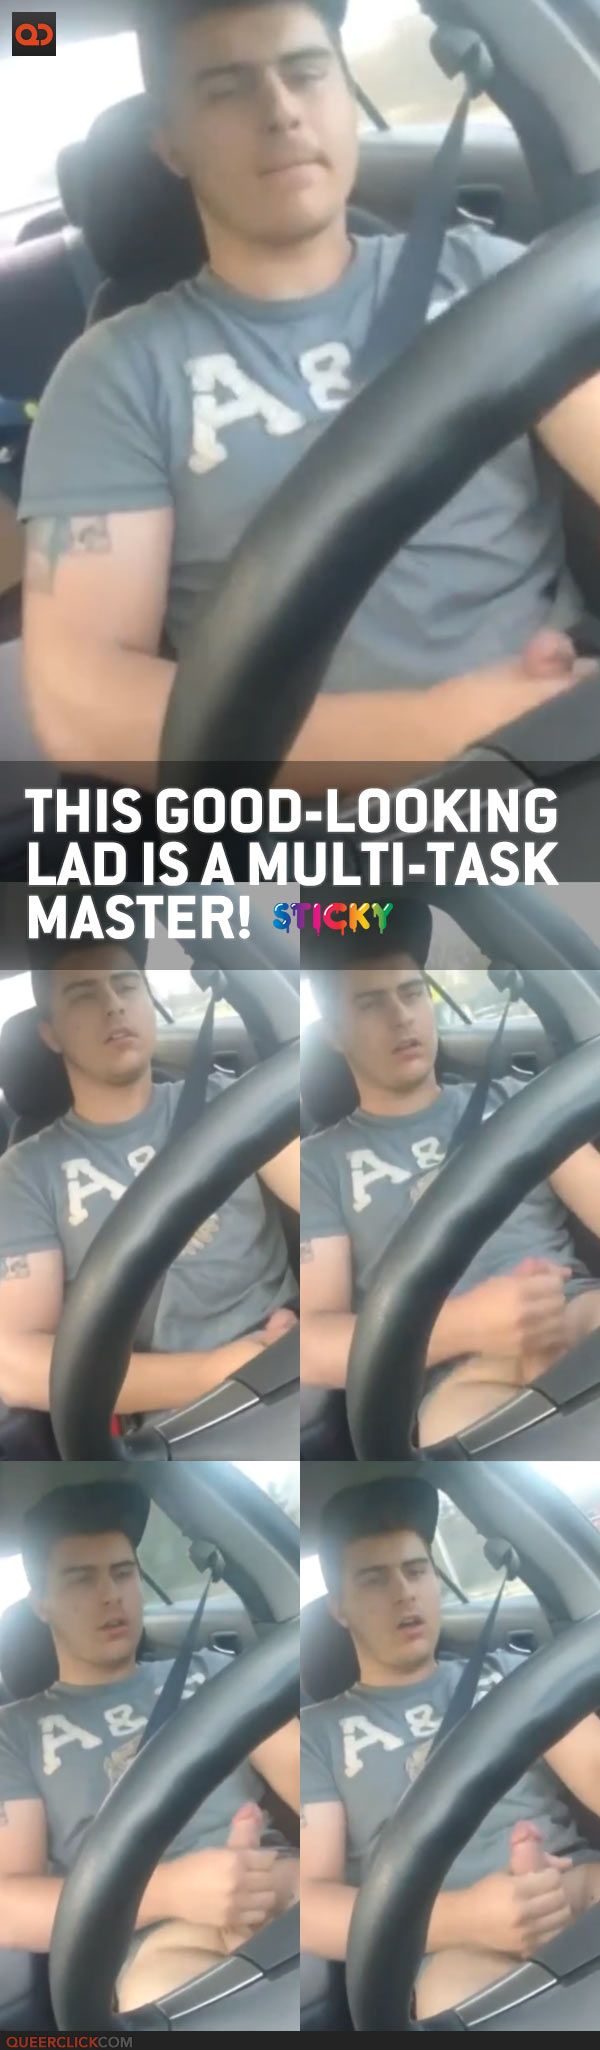 This Good-Looking Lad Is A Multi-Task Master!